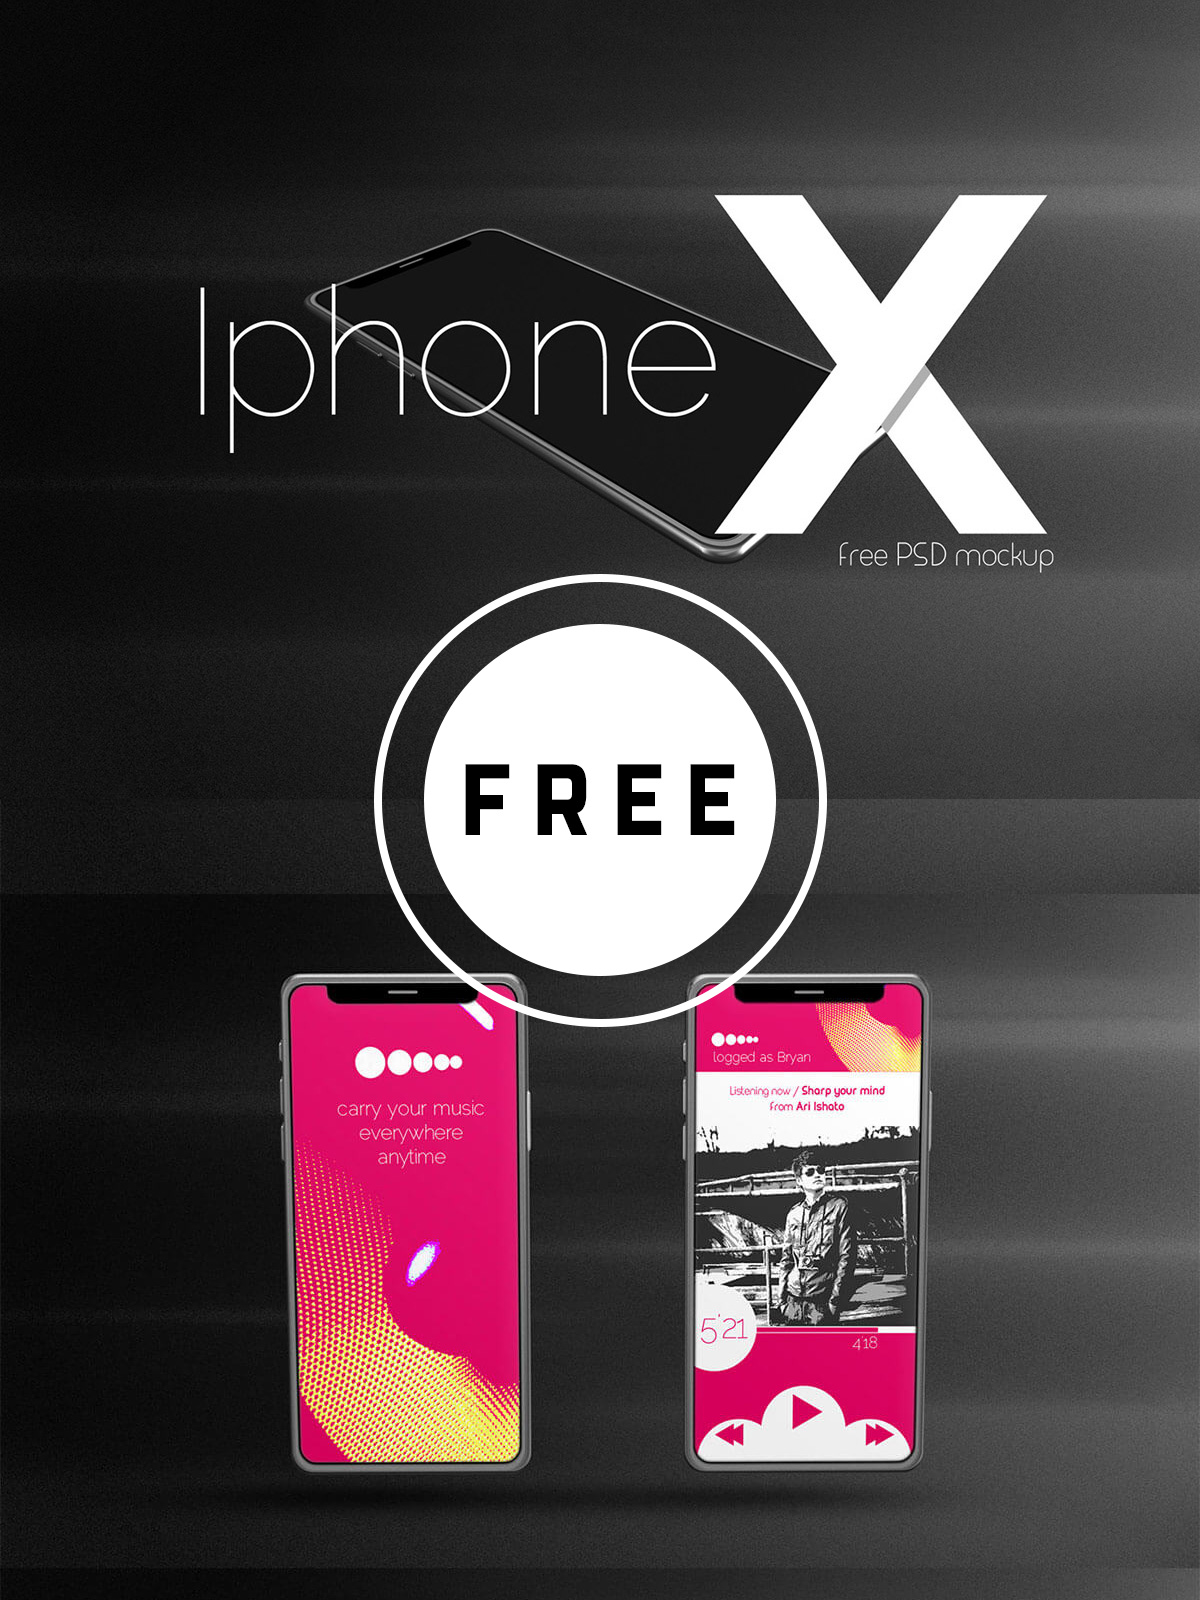 75 Best Free iPhone X, iPhone XS, iPhone XS Max & iPhone XR Mockup Templates & Resources